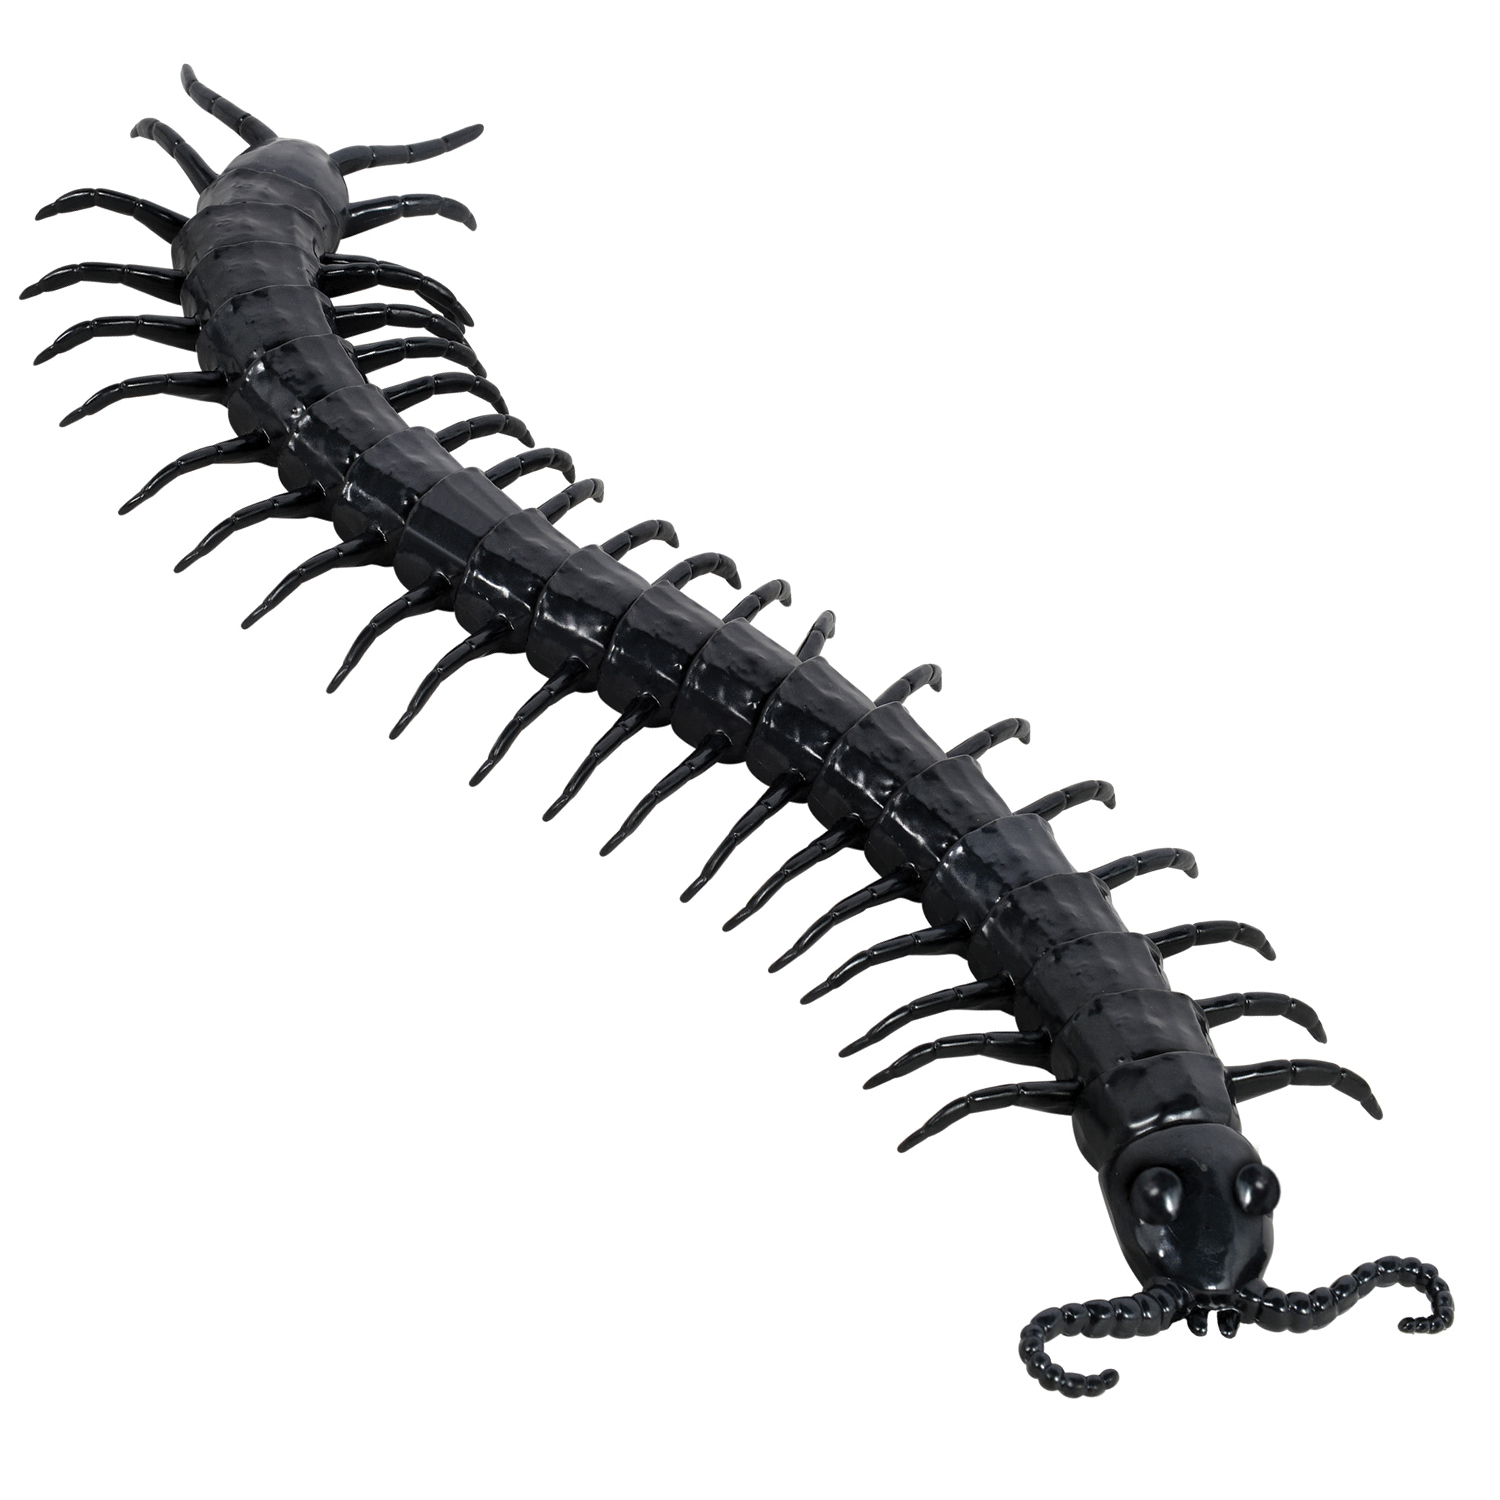 White Centipede Insect 6 Pack New Halloween Scary Creepy Plastic Party Anim...